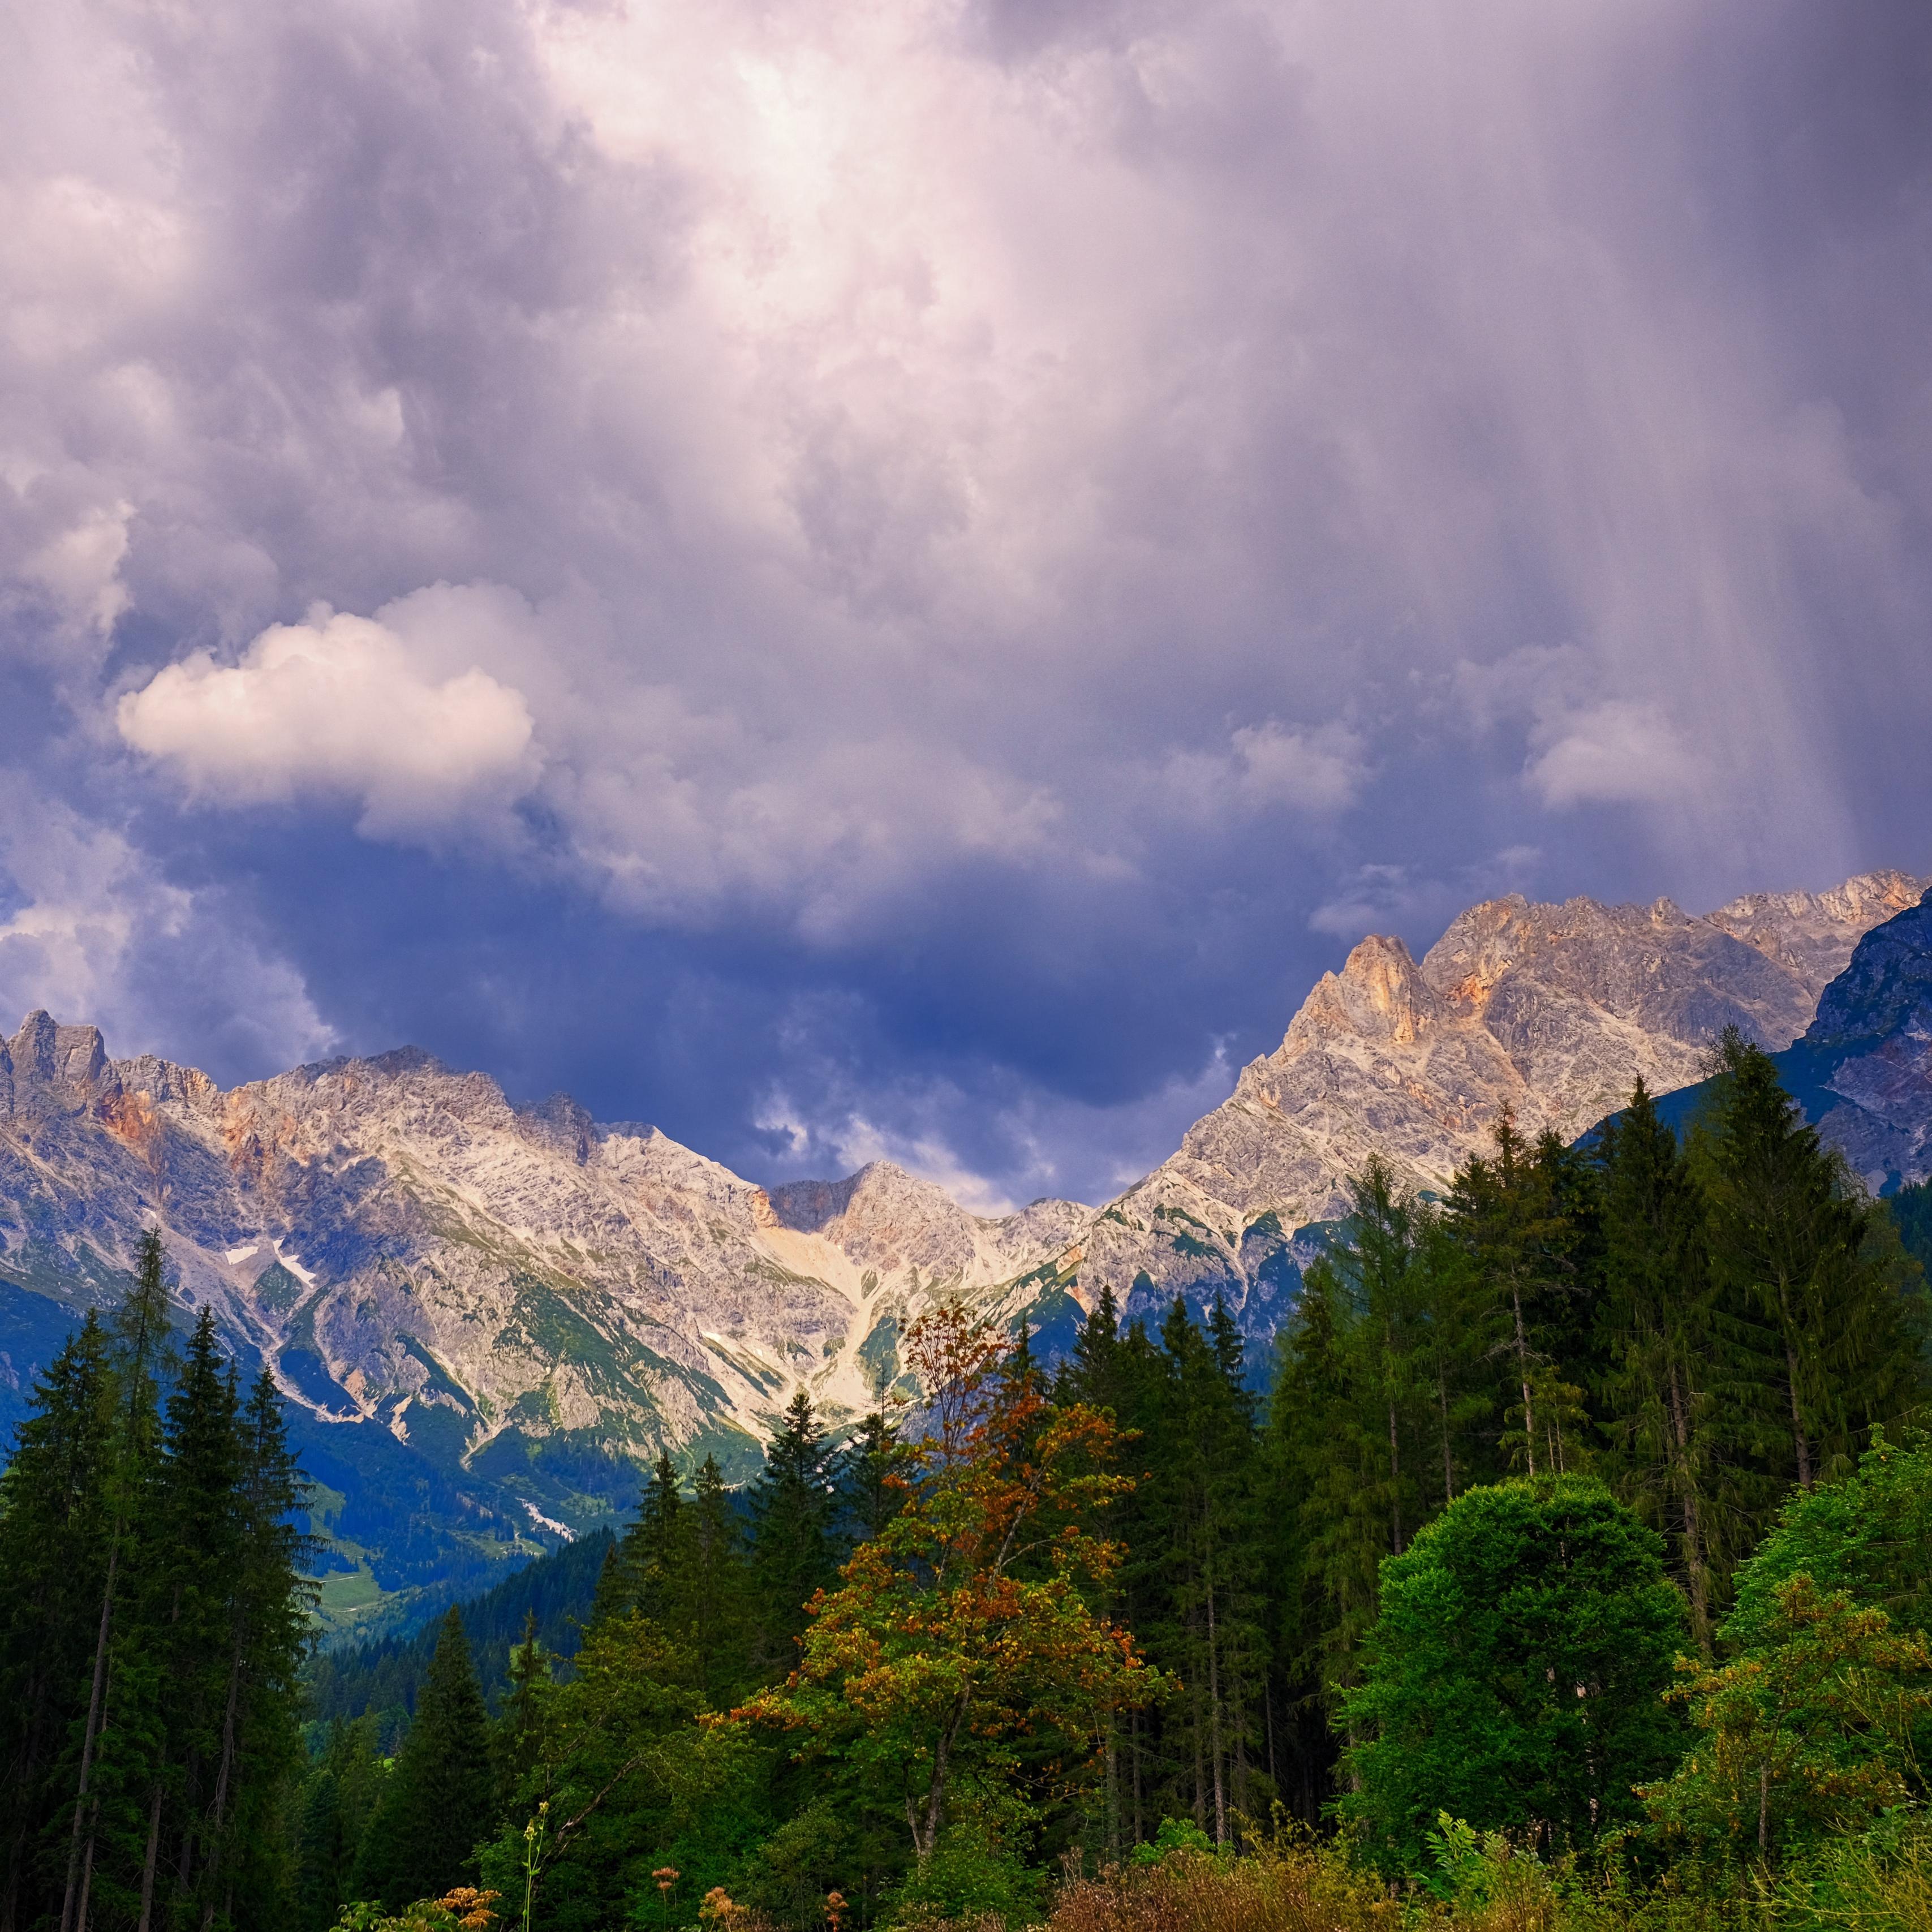 Download wallpaper 3415x3415 mountains, trees, clouds